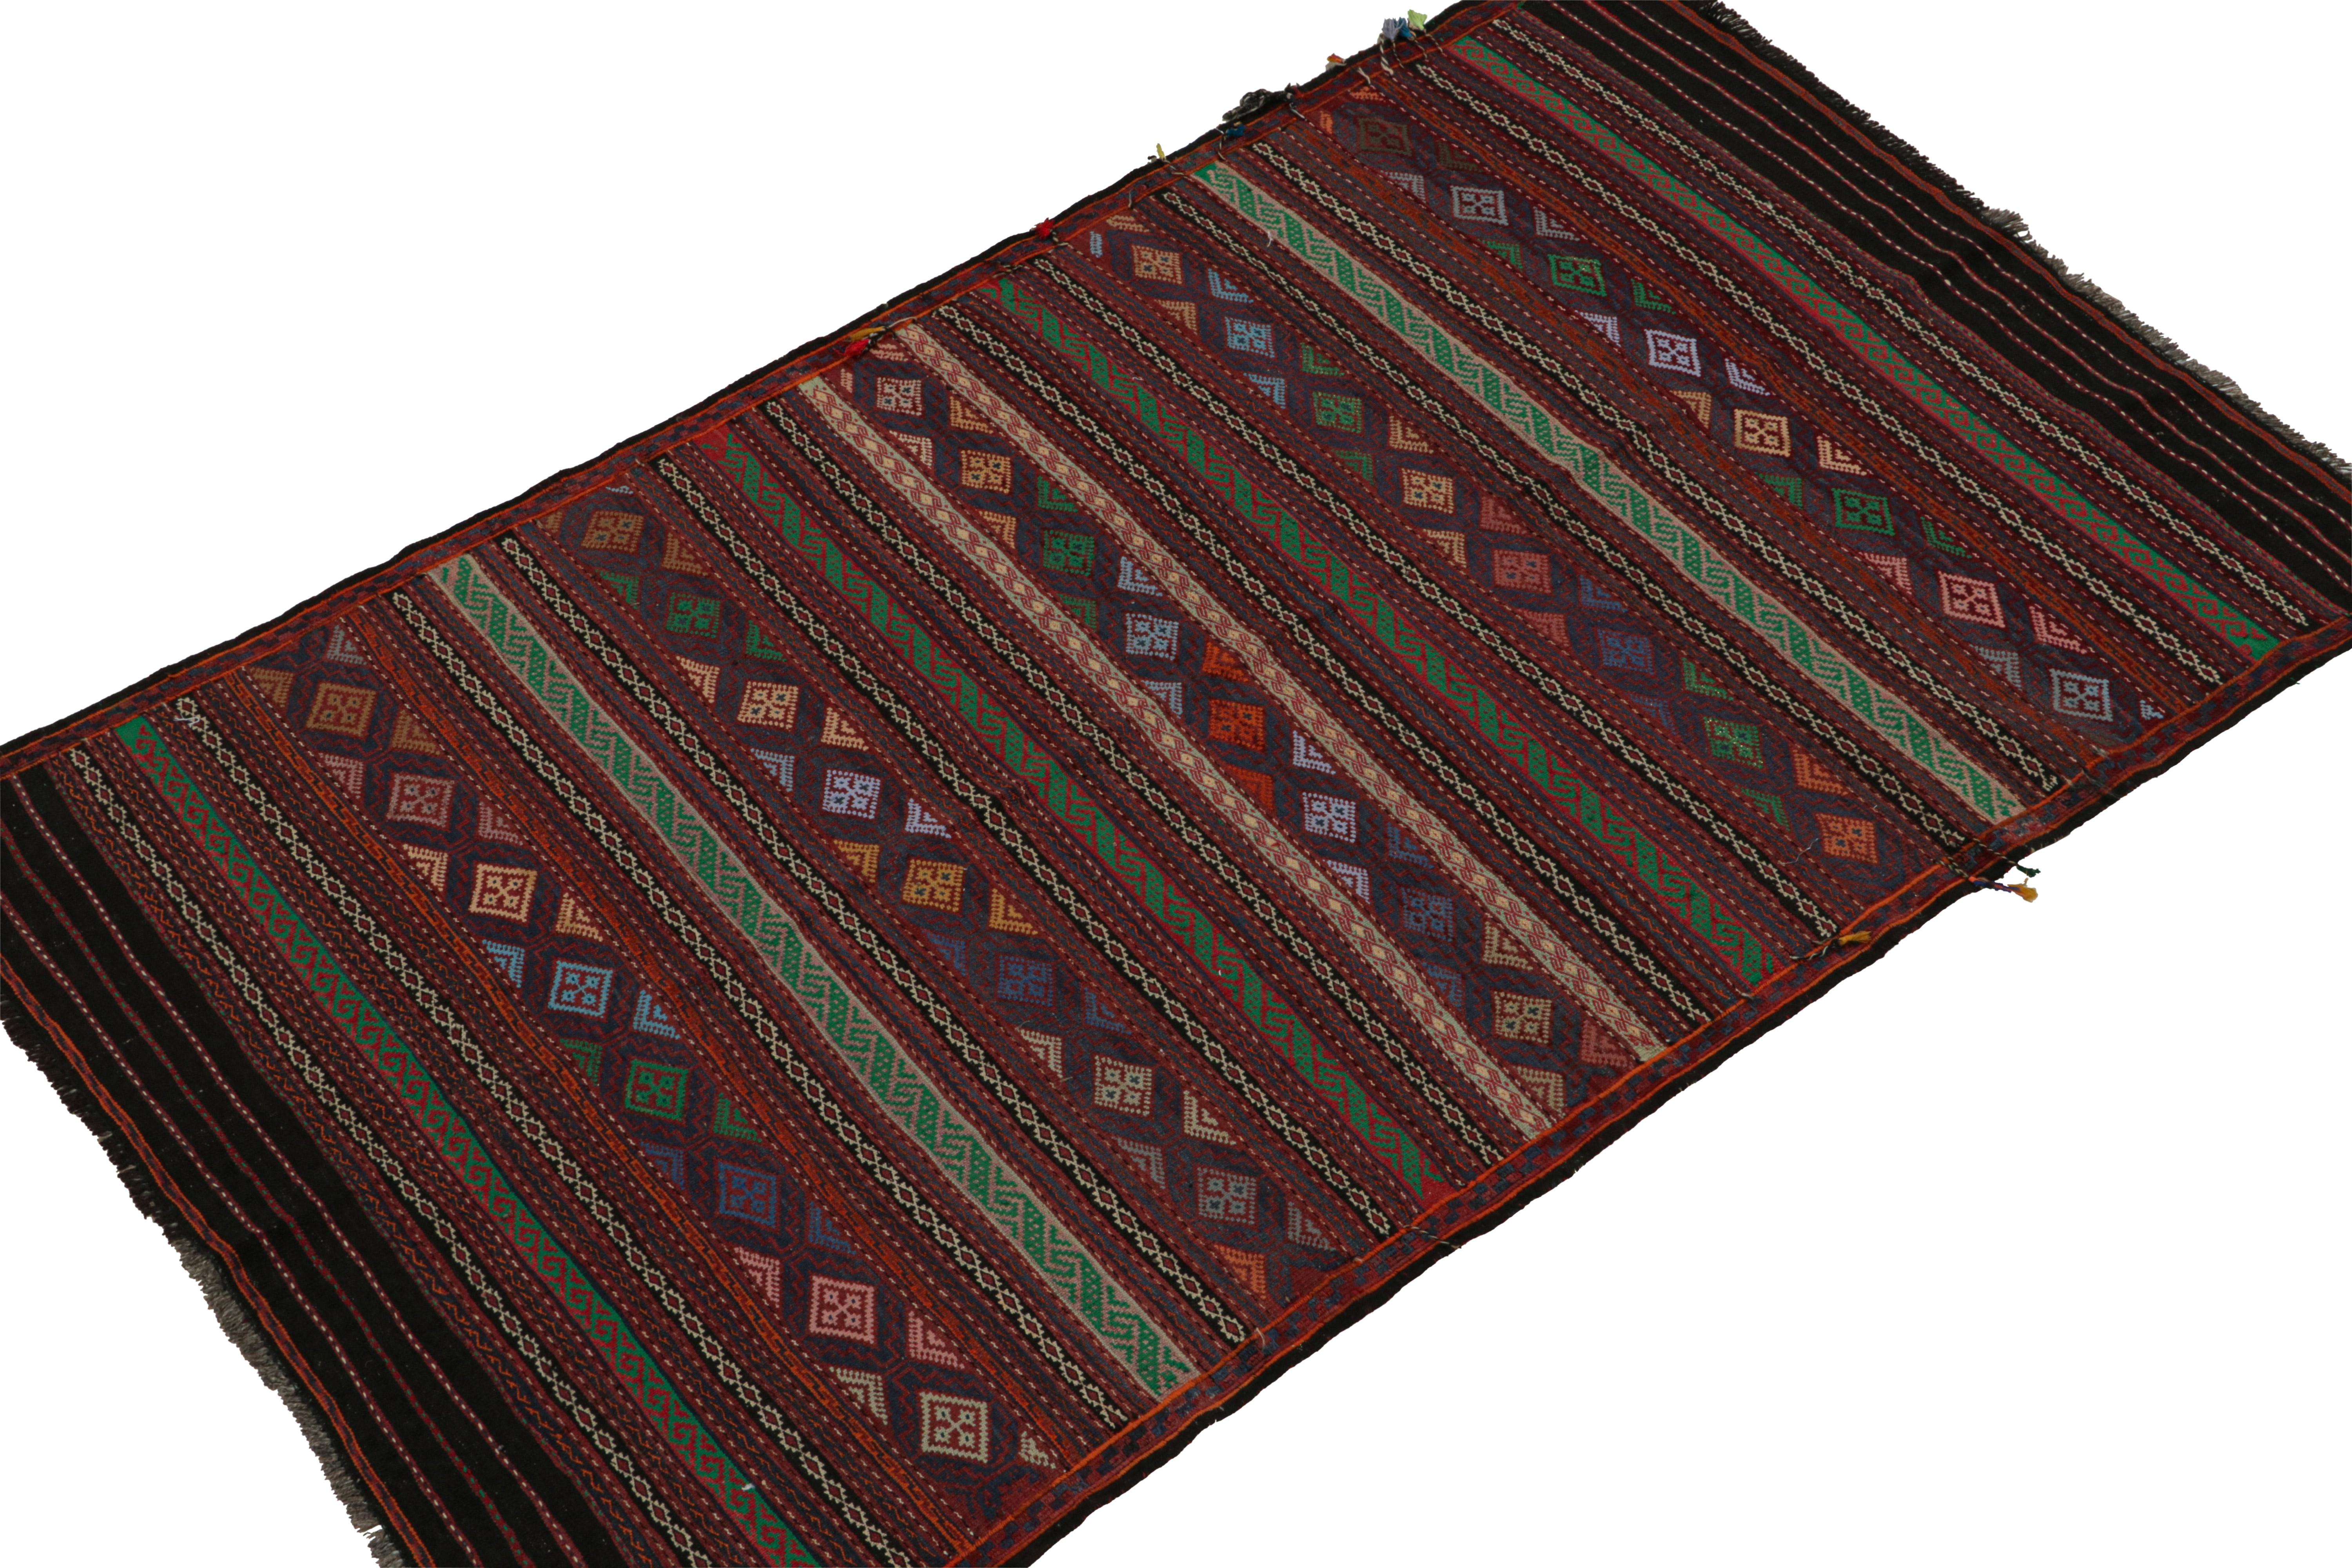 Handwoven in wool circa 1950-1960, this 4x7 vintage tribal Baluch kilim rug is the latest to join Rug & Kilim’s collection of coveted flatweaves. 

On the Design: 

Specifically believed to hail from the Leghari clan of this nomadic tribe, this